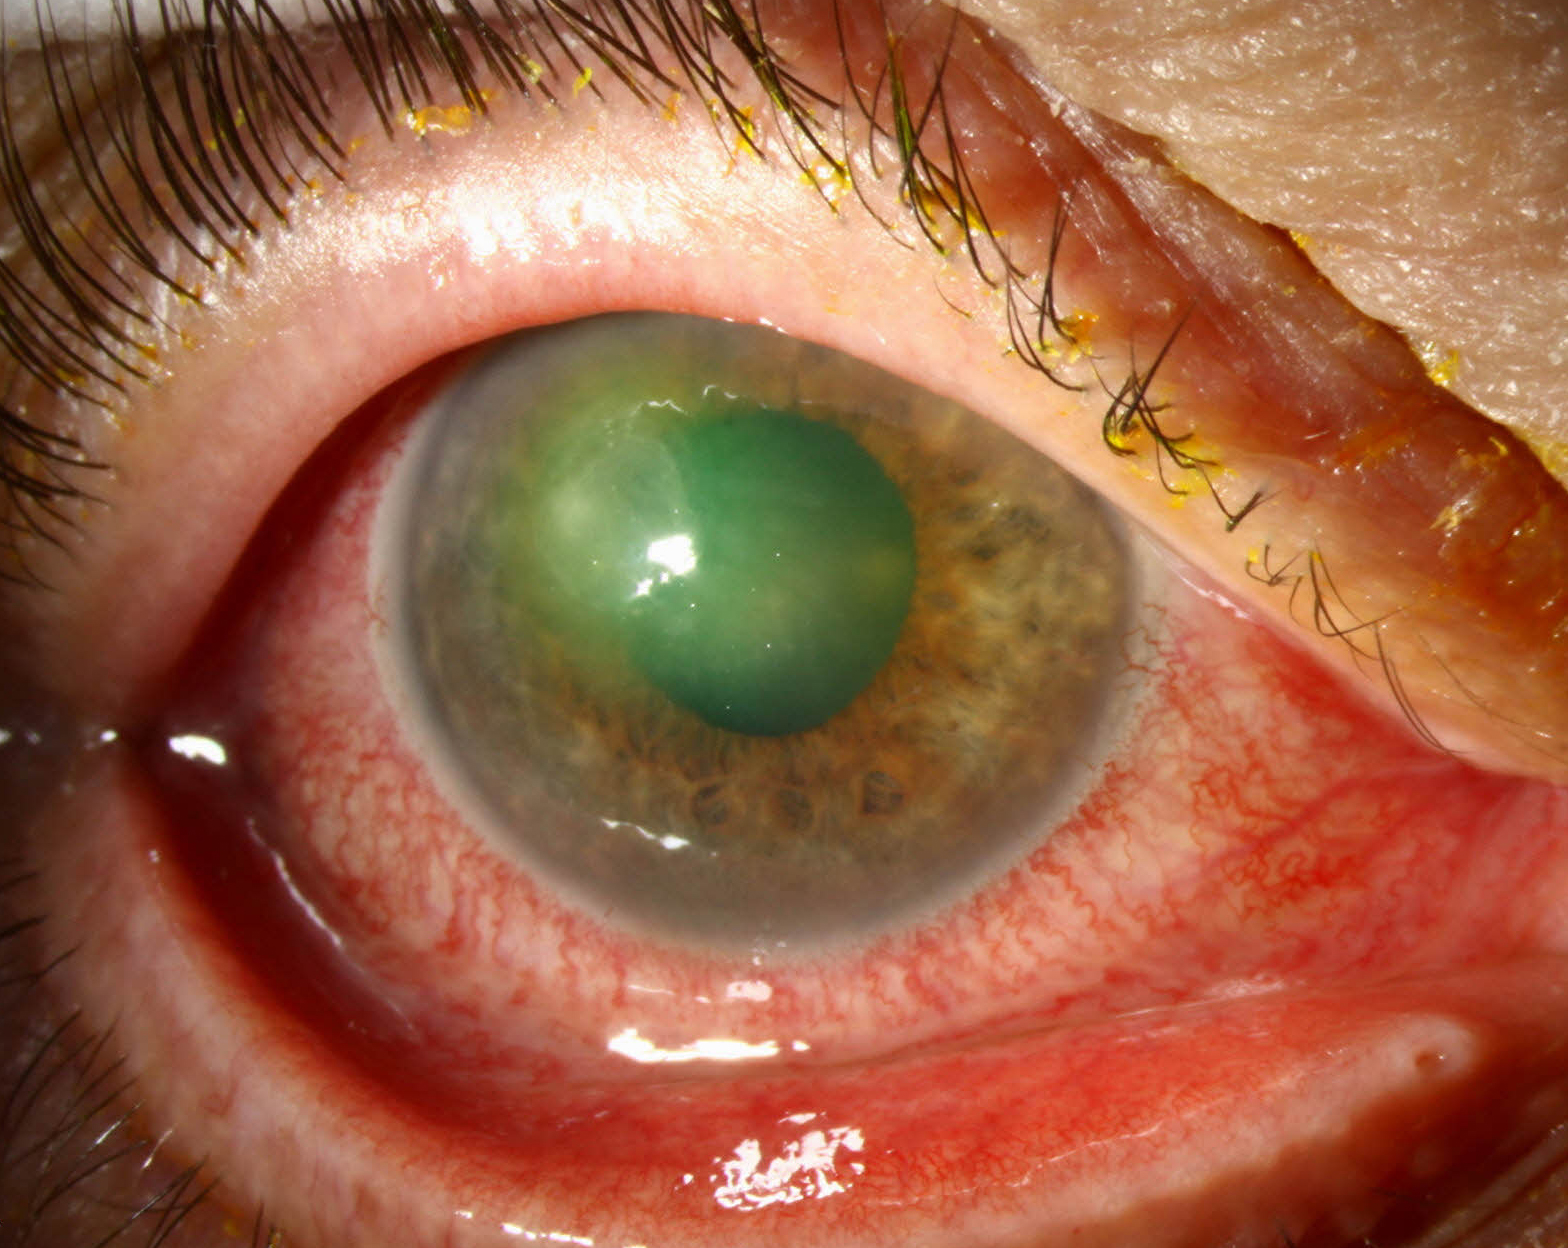 Findings suggest that where a patient with microbial keratitis lives was associated with VA at presentation.